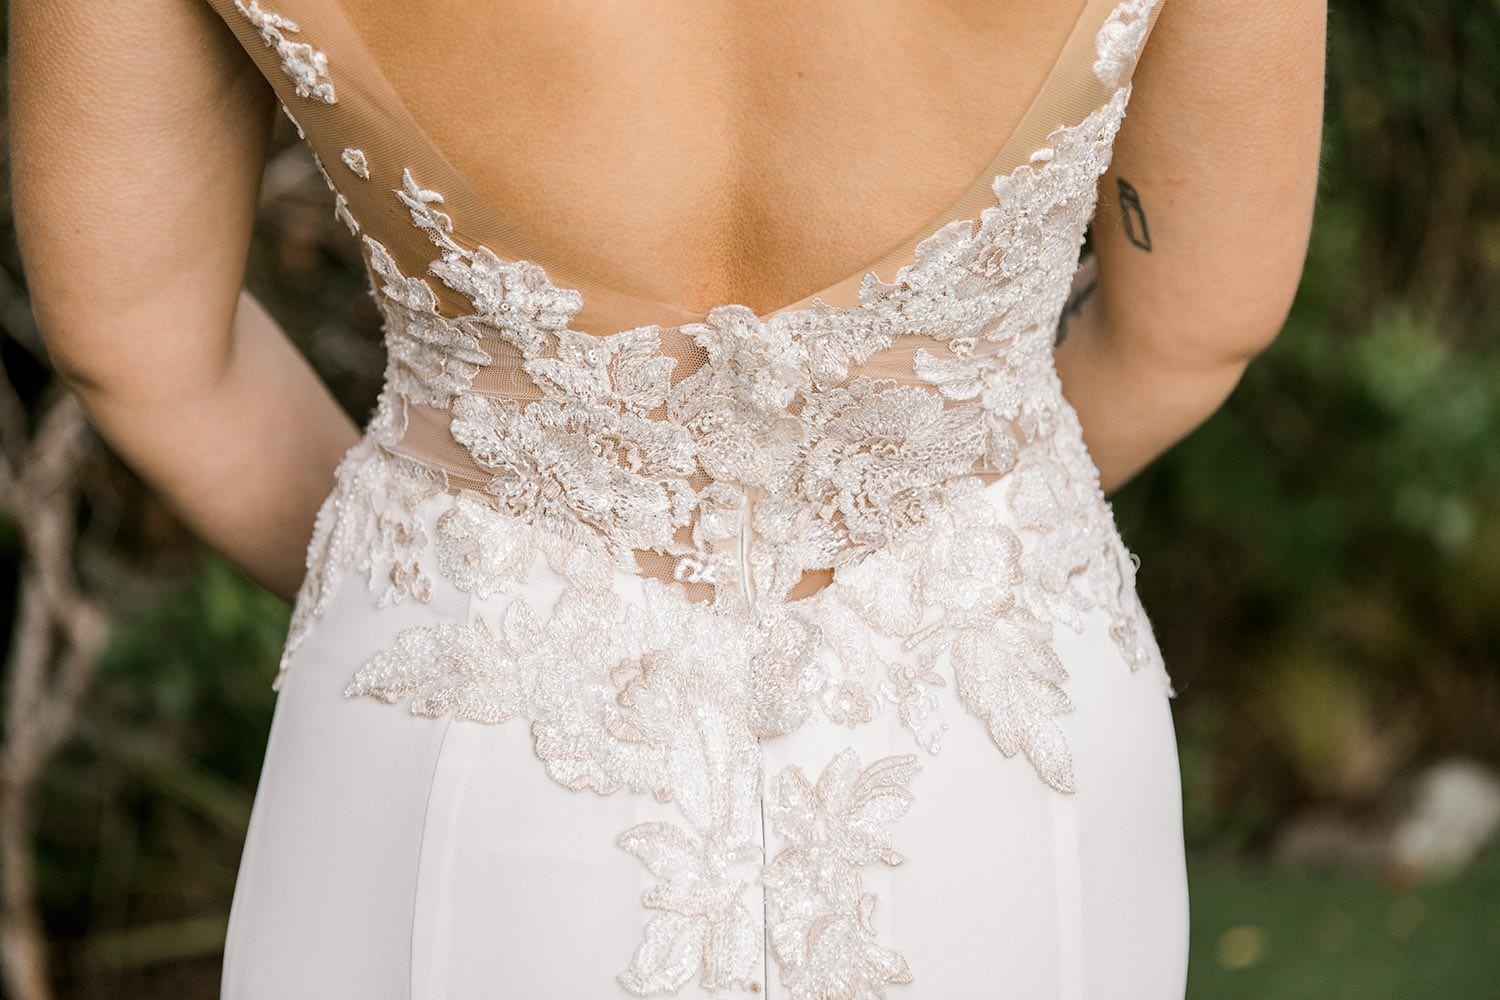 Samantha Wedding Dress from Vinka Design. This beautiful wedding dress has a nude sheer illusion strapless neckline made from fine Italian tulle. Low sheer back & structured bodice, & soft crepe train. Close up detail of low back. Photographed in Landscaped garden.